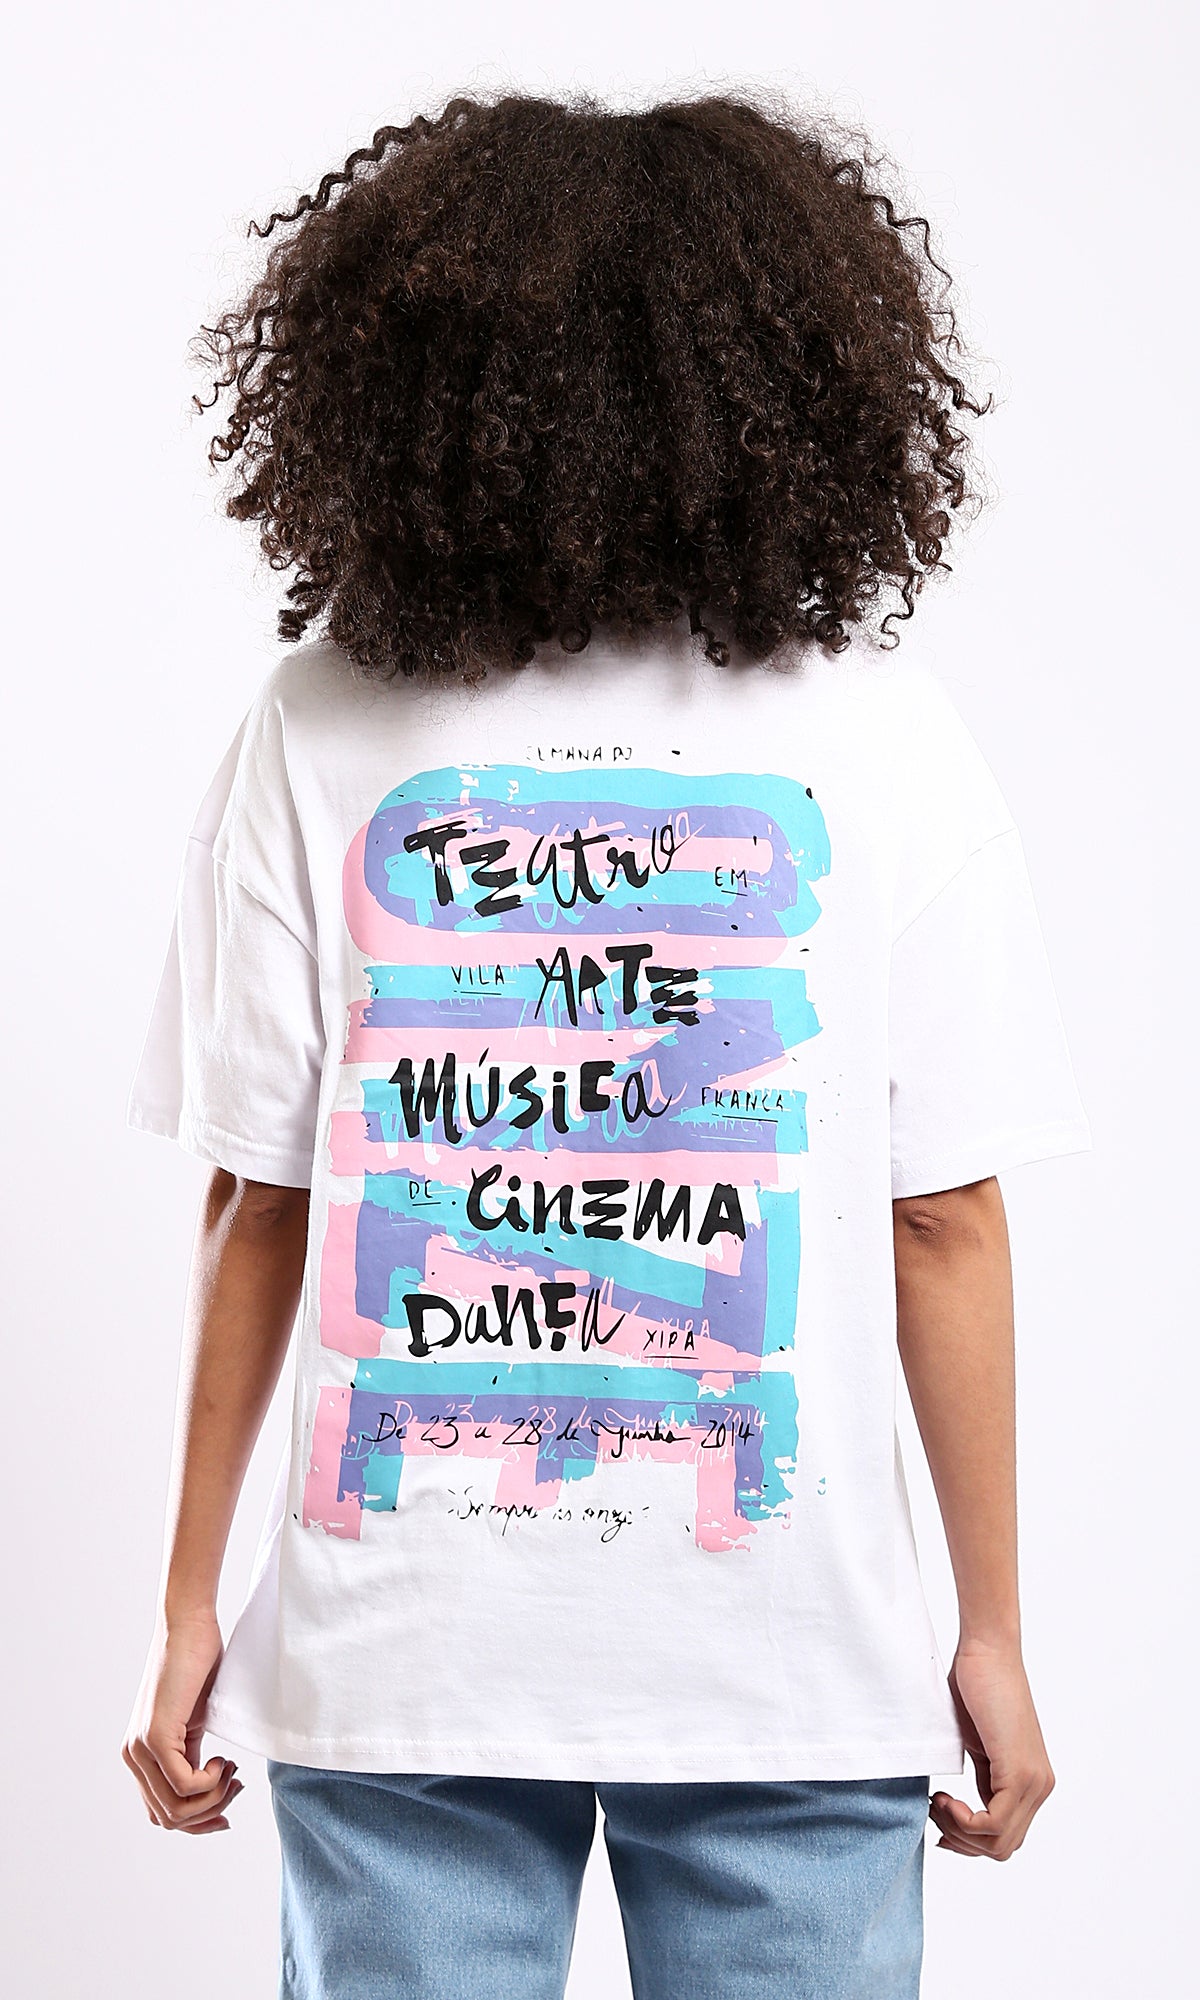 O178405 White Front Print & Back Cotton Casual Tee